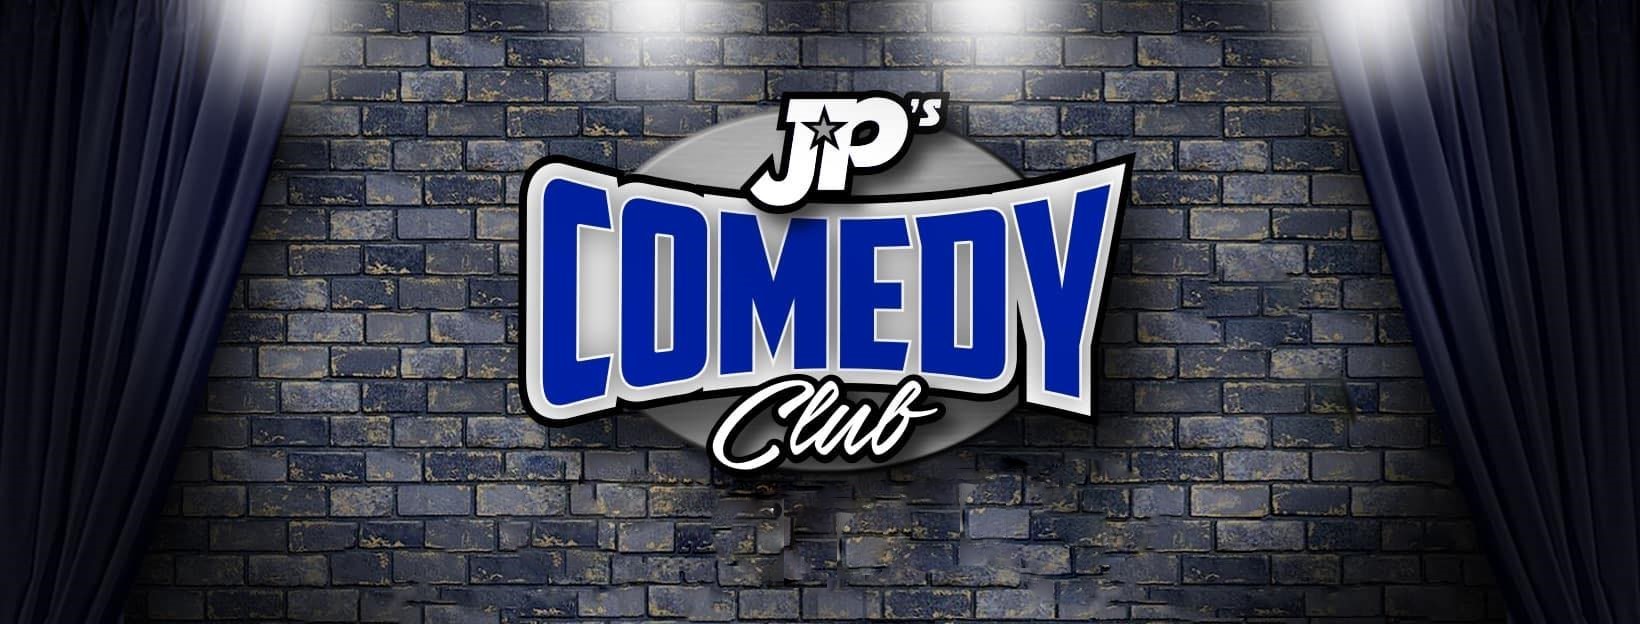 FREE COMEDY SHOWS- Thursday at 7PM, Friday at 7PM and 9PM and Saturday at 7PM and 9PM, Gilbert, Arizona, United States